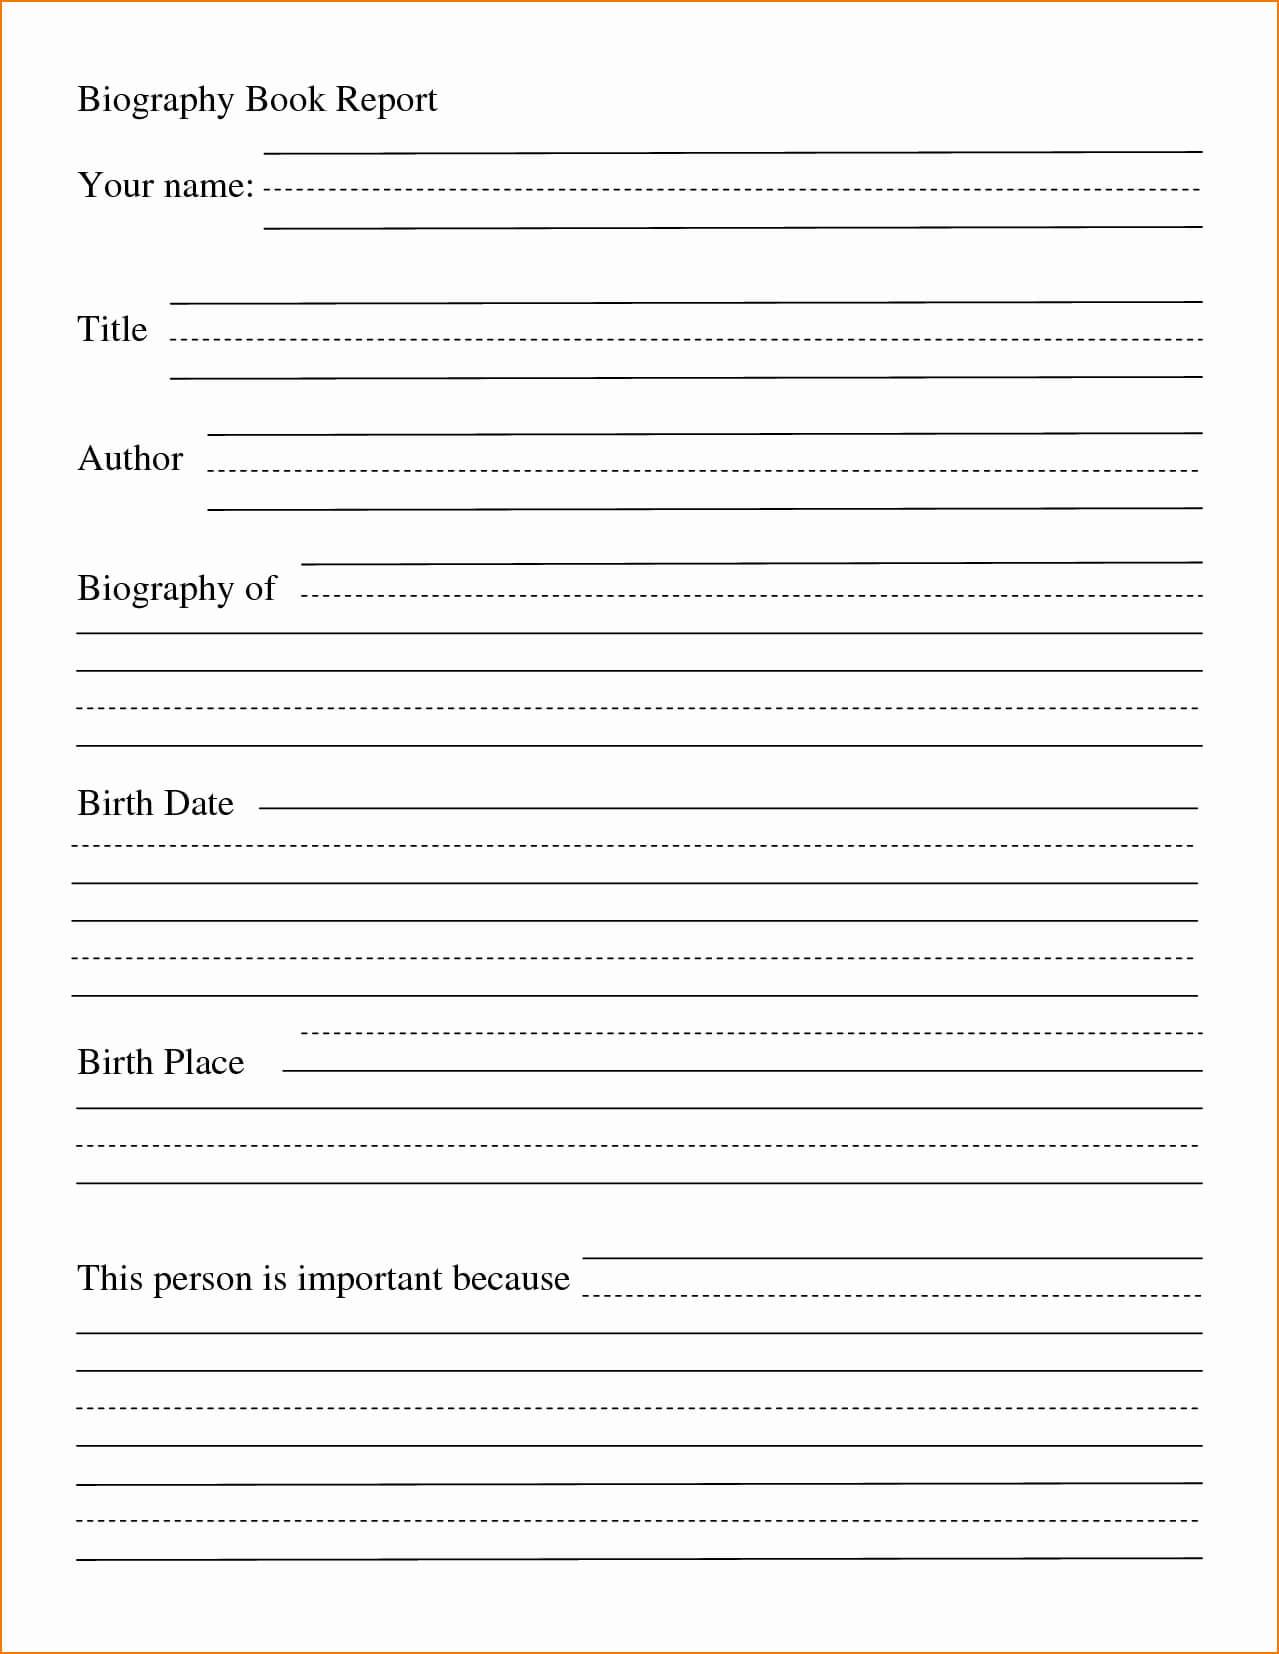 Financial Tatements Template Pdf For 2Nd Grade Book Report Inside 4Th Grade Book Report Template